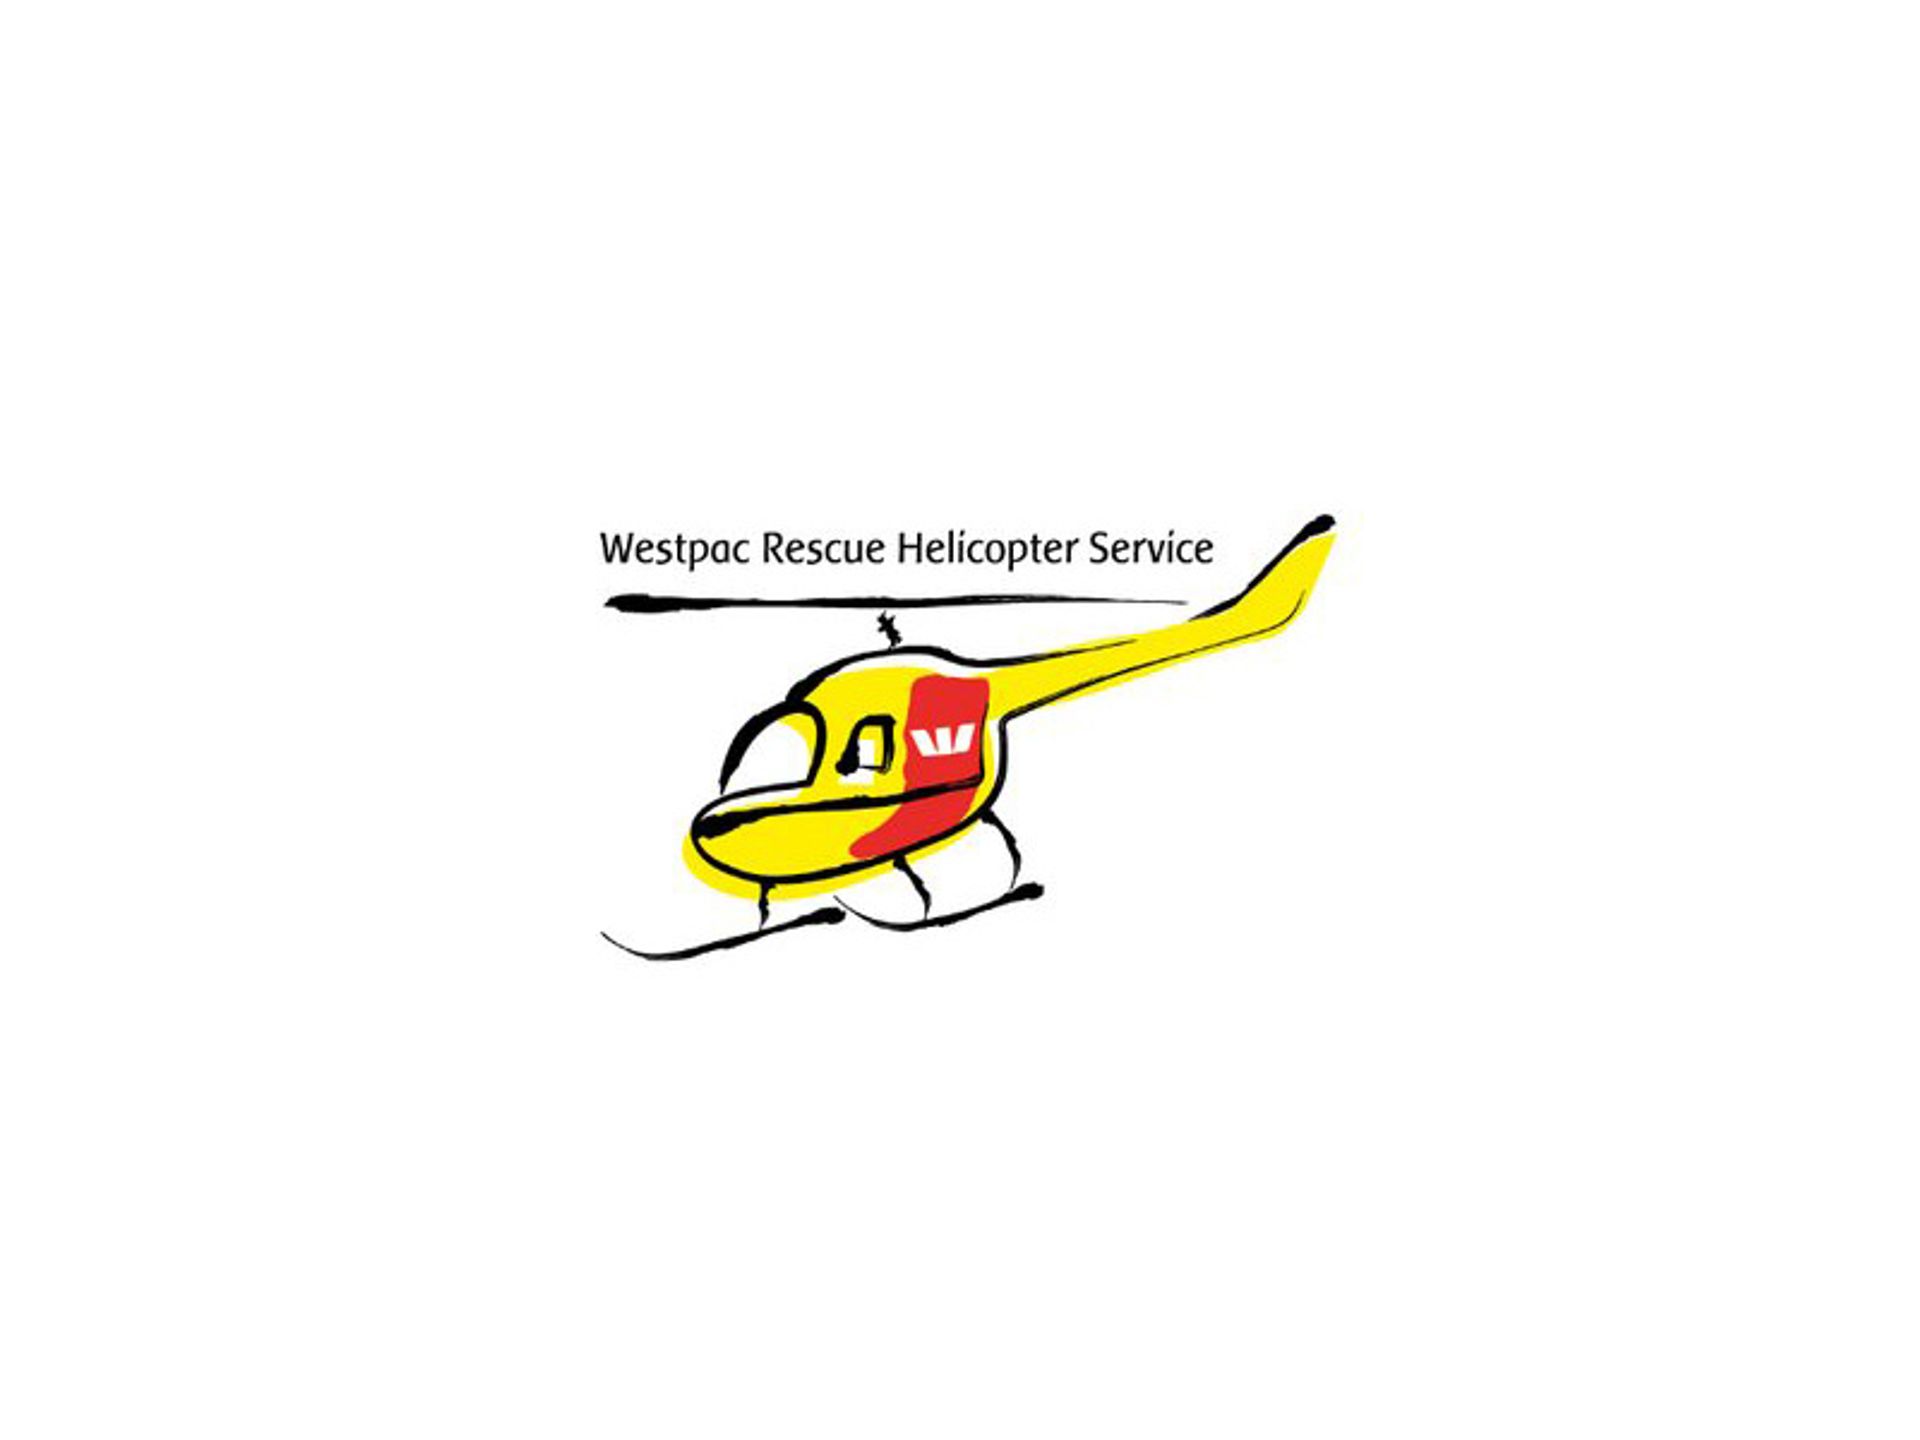 WestPac Rescue Helicopter